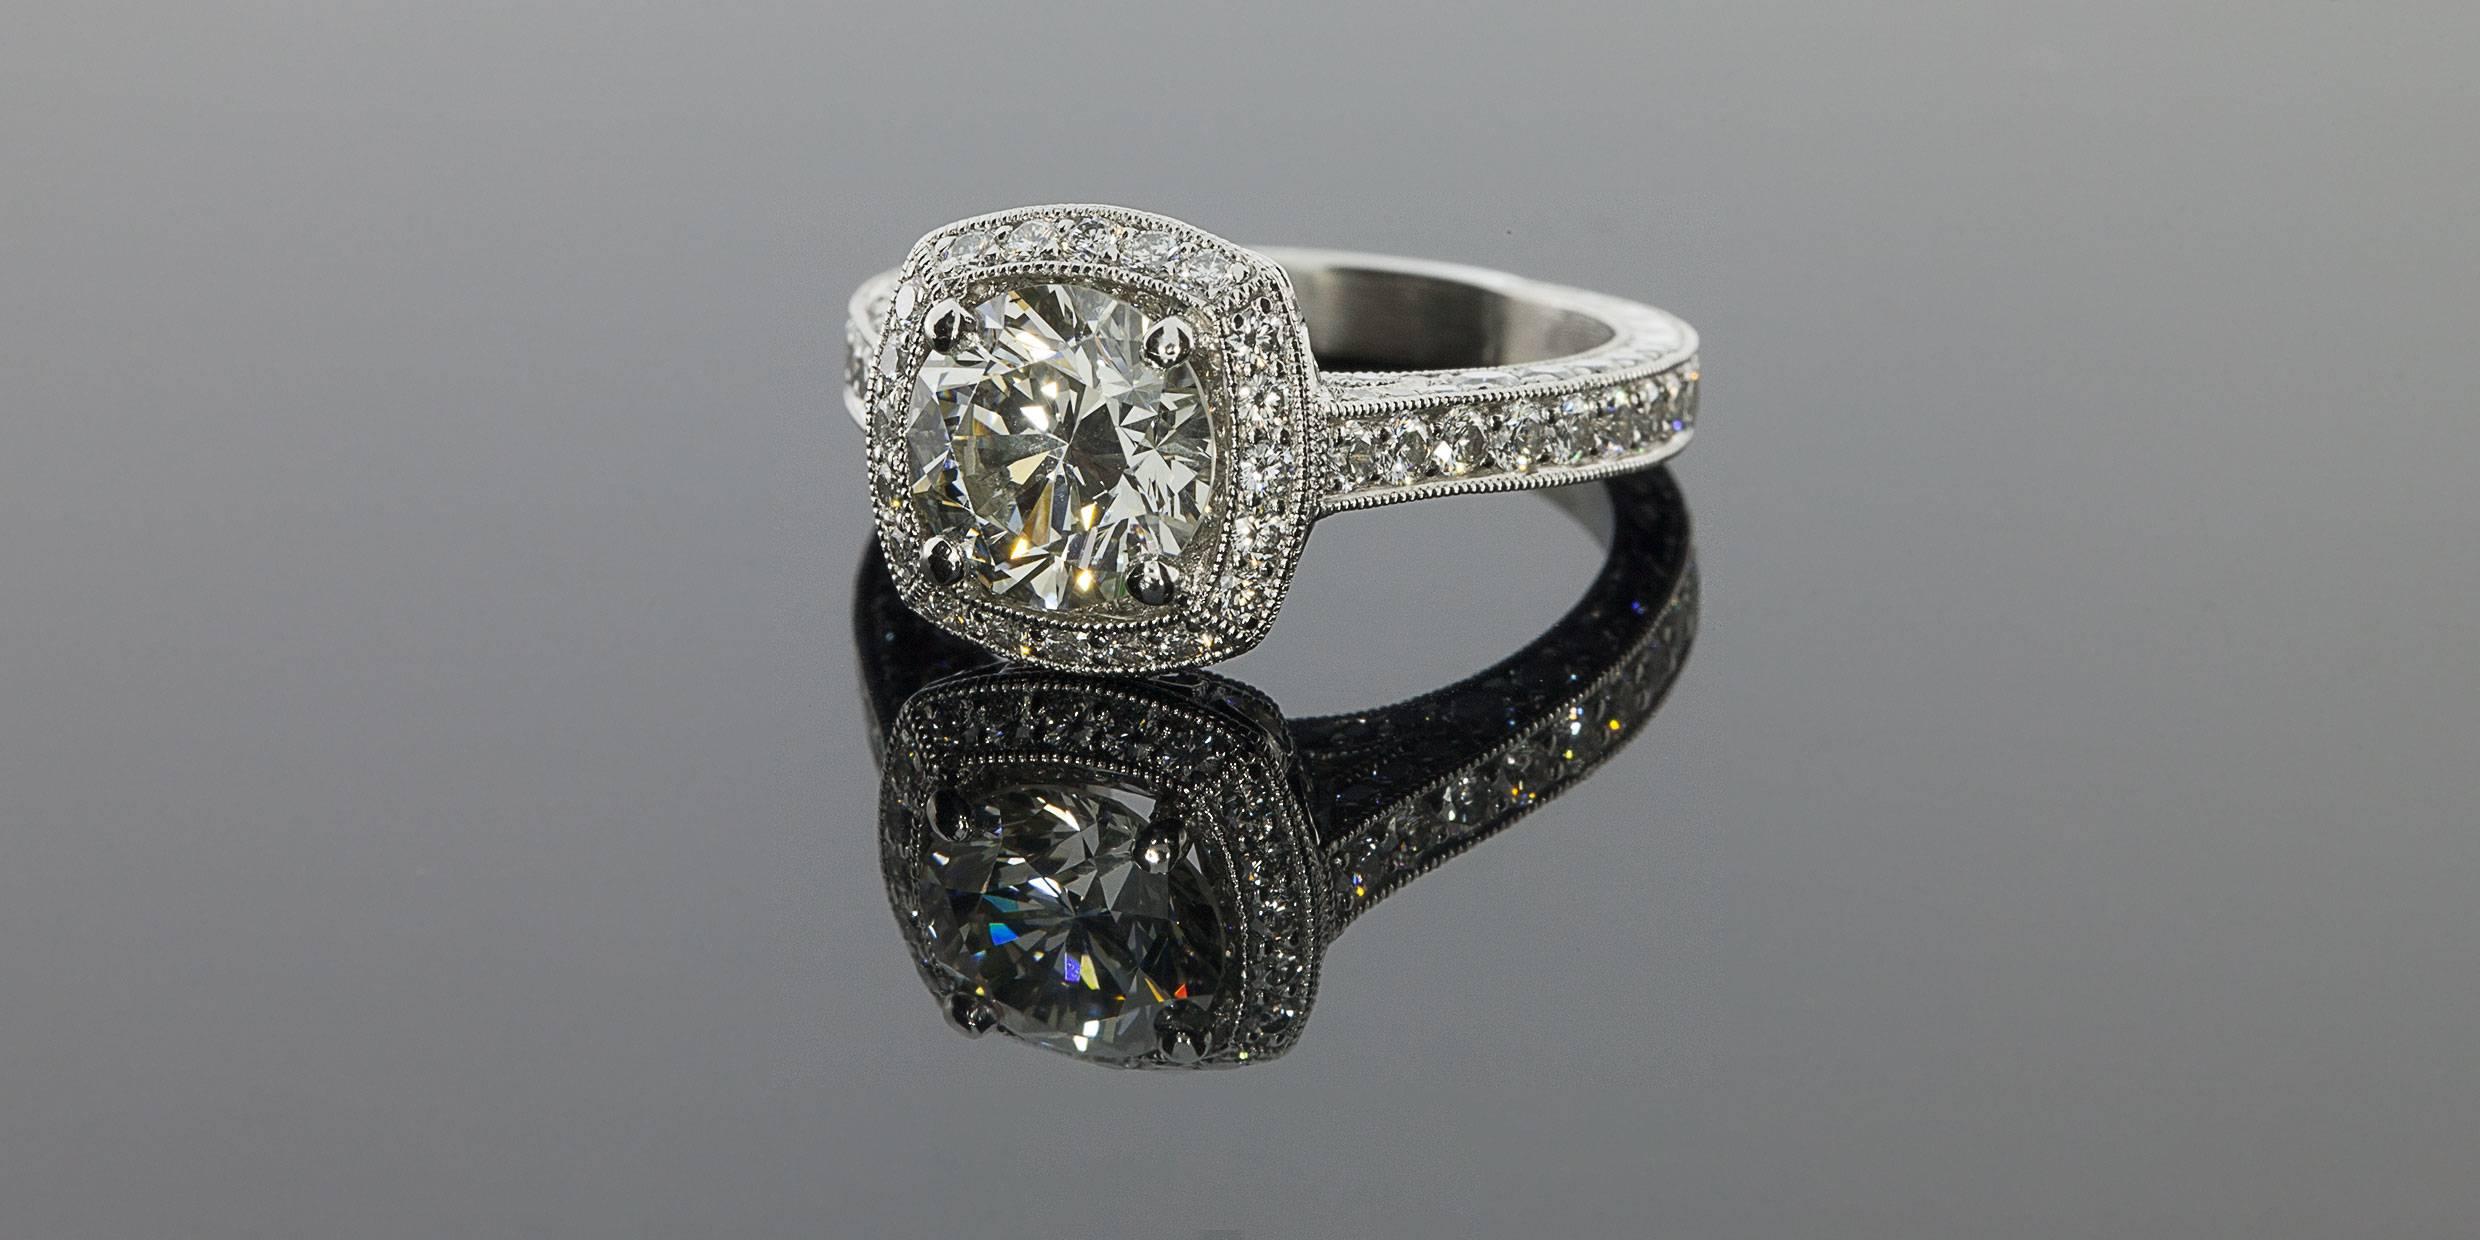 Take her breath away with this spectacular  Jack Kelege 3.77ctw diamond ring! Jack Kelege has been making timeless designs coupled with superior craftsmanship & attention to detail for over 40 years. A legend in the jewelry business, Jack is known